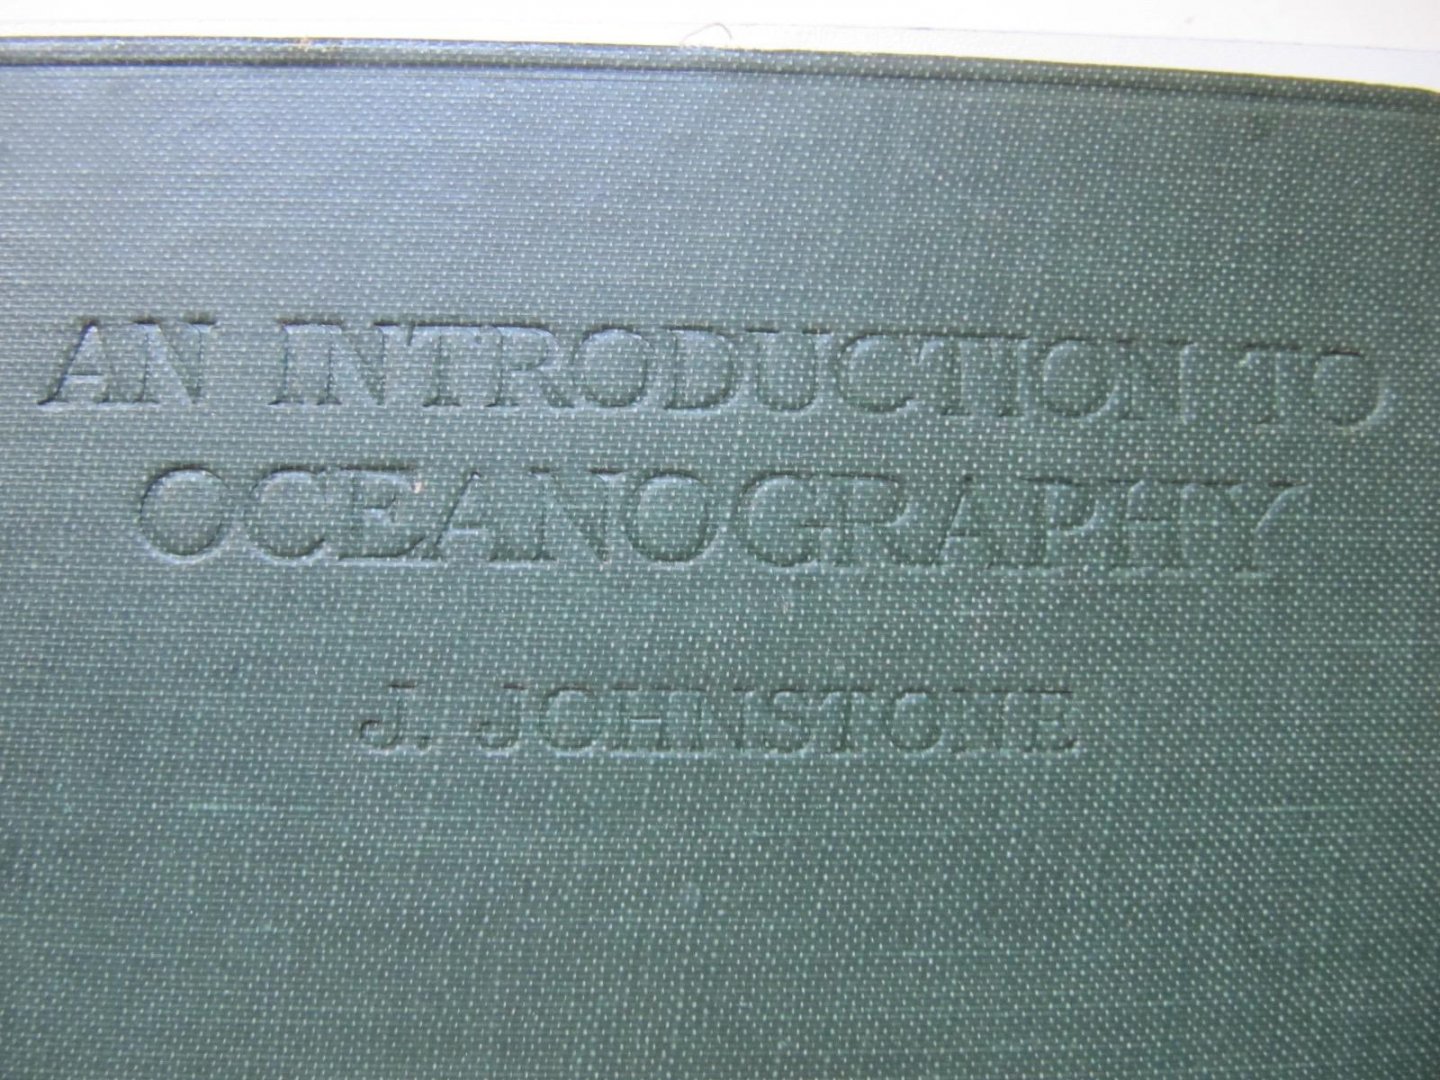 J. Johnstone - An Introduction to Oceanography